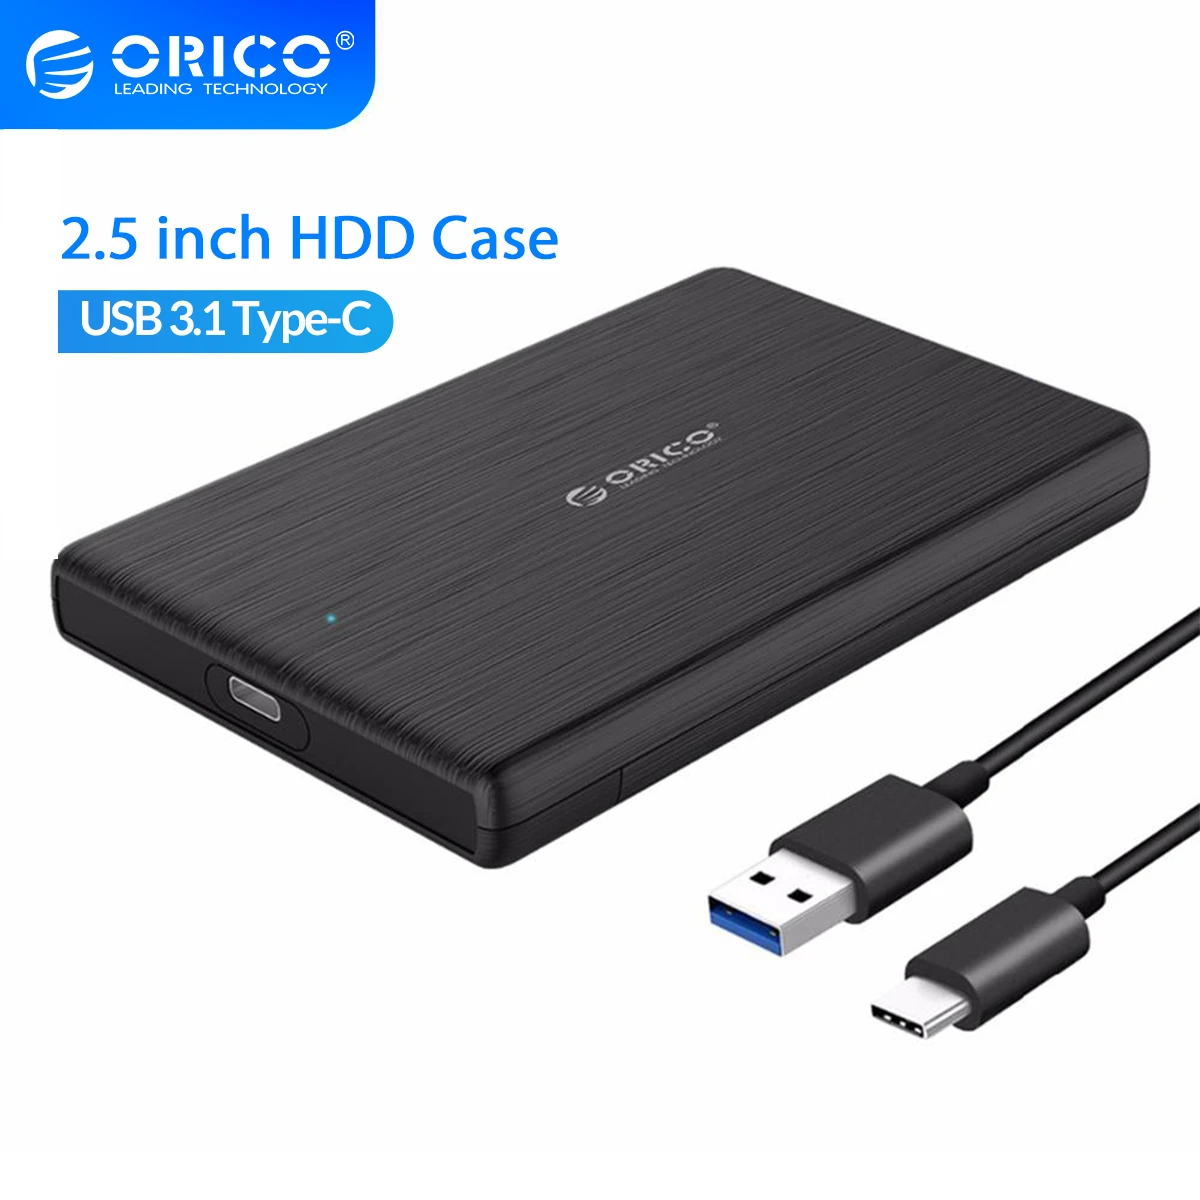 ORICO 2.5 Inch HDD Case SATA3.0 to USB 3.1 Type-C External Hard Drive Case Enclosure for 7-9.5mm HDD SSD Disk Box Support UASP case hdd external